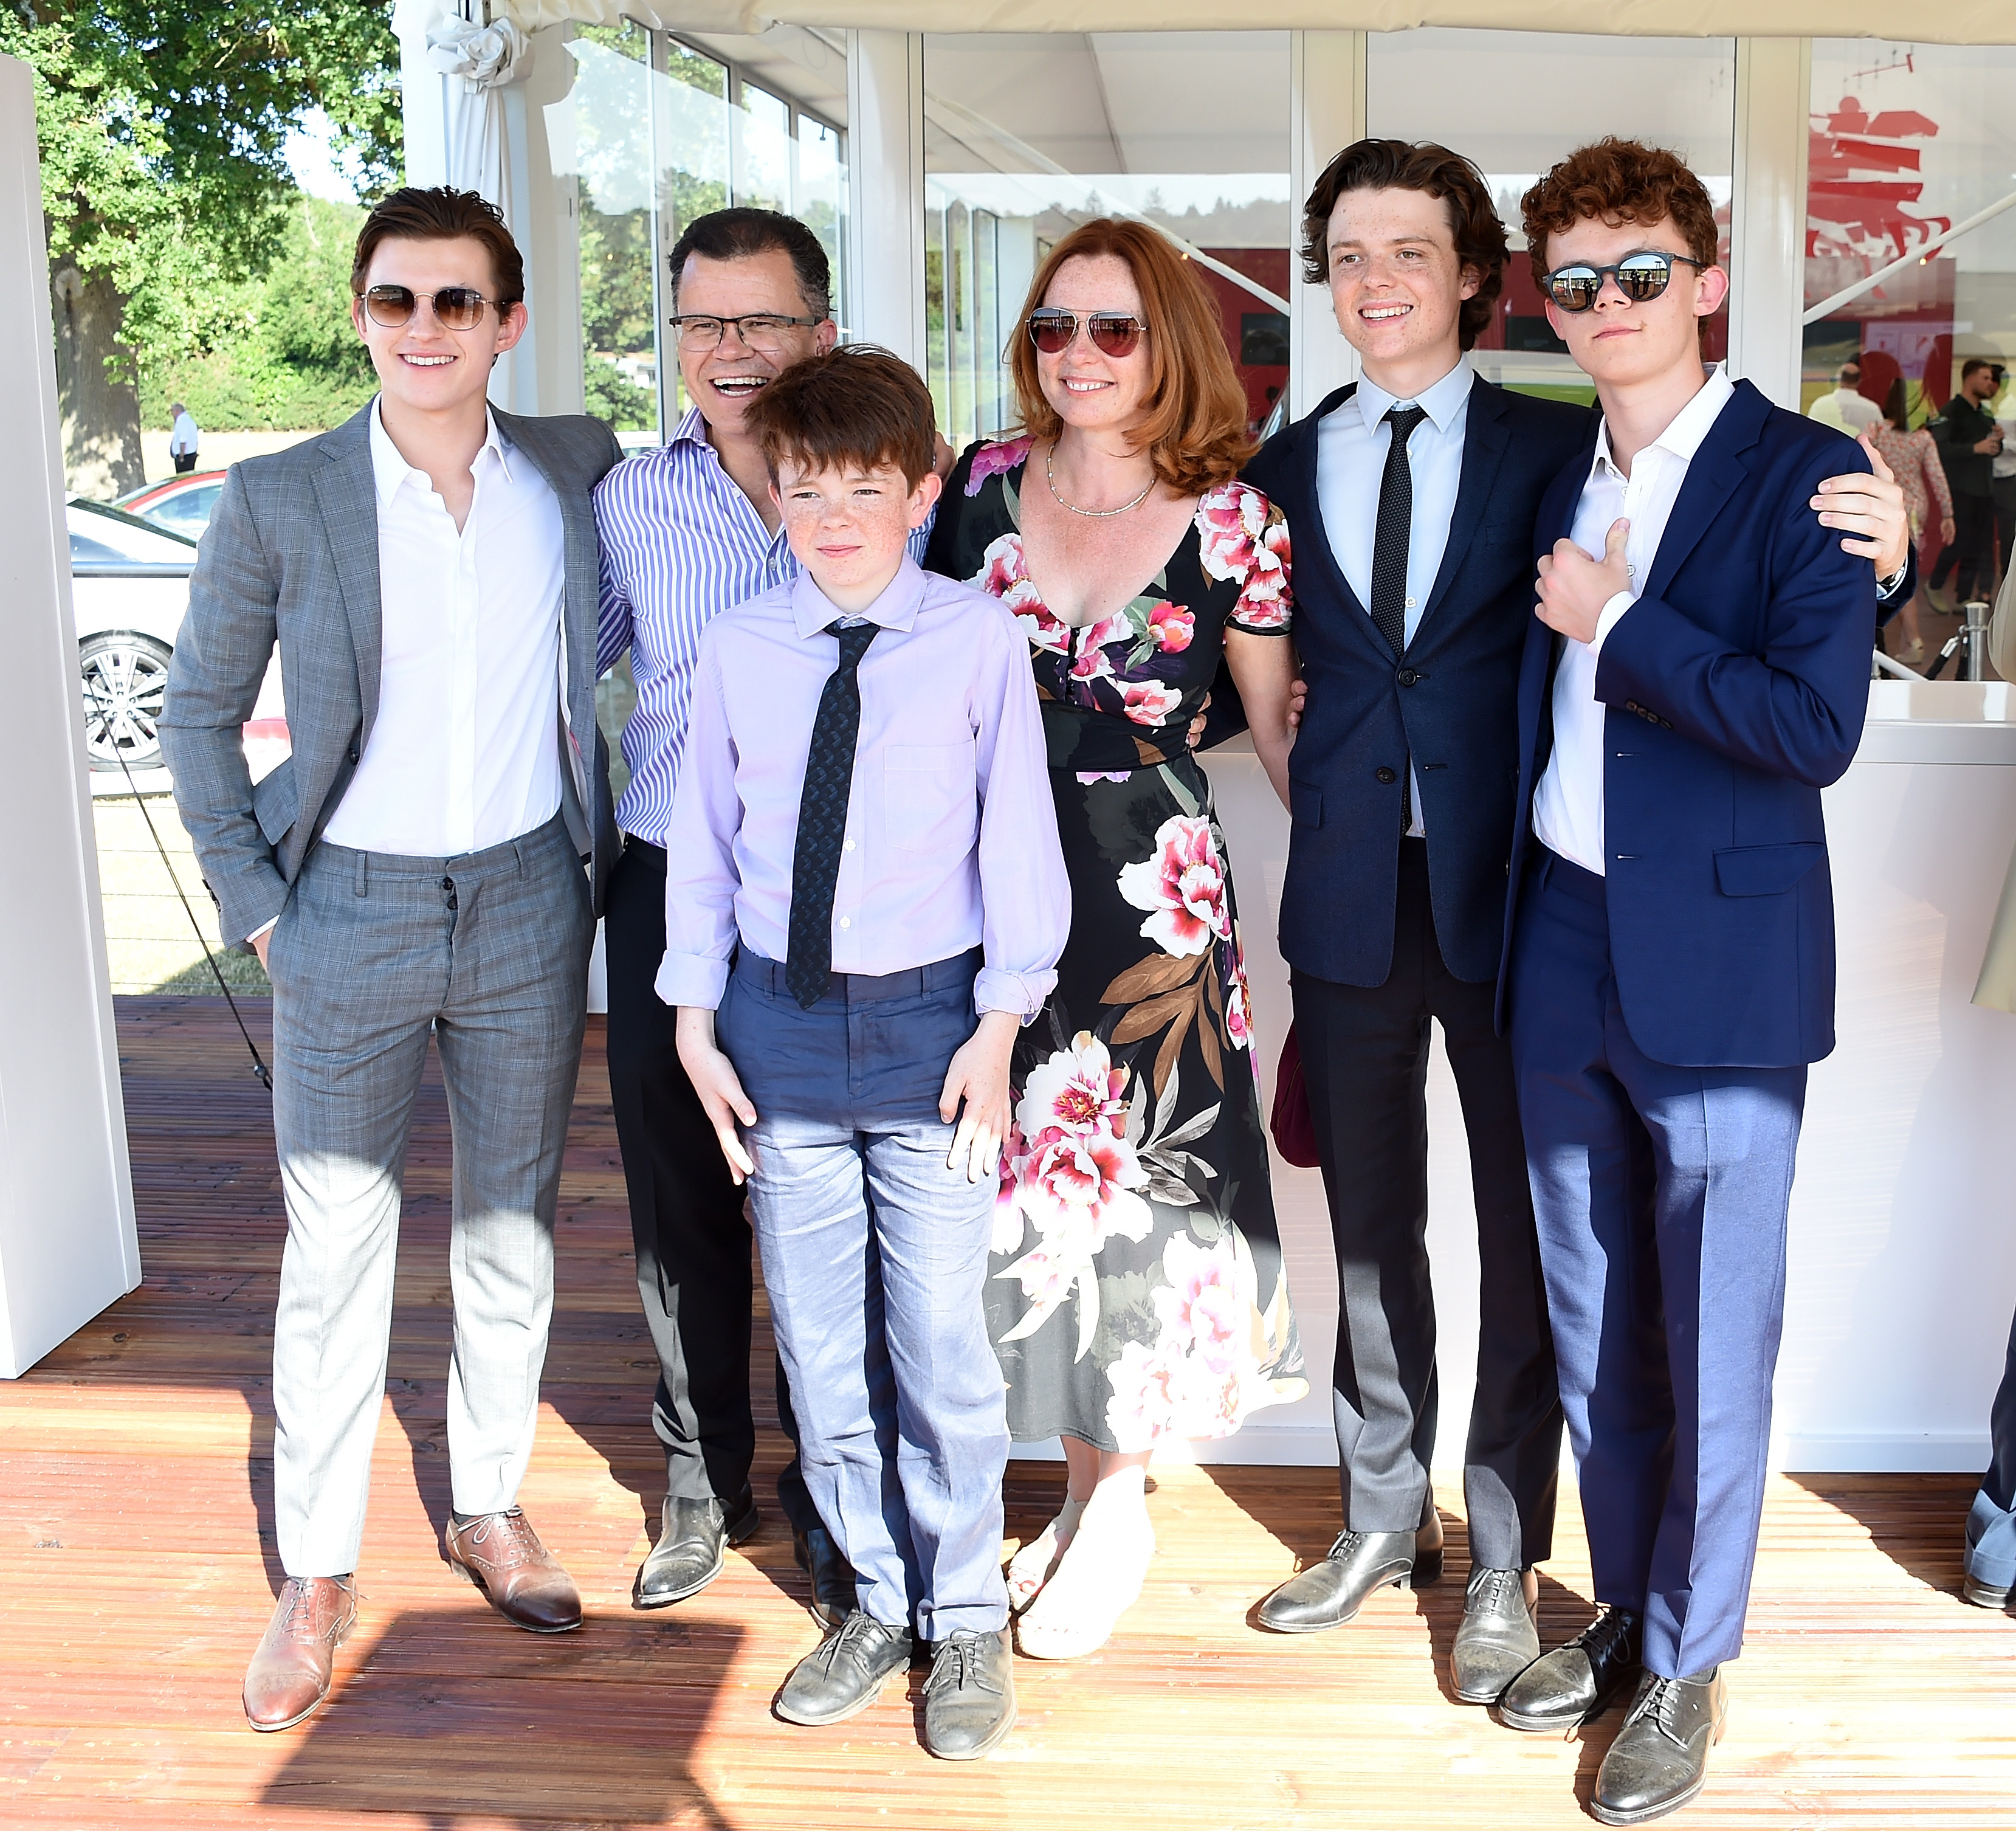 Tom, Harry, Sam and Paddy Holland posing with their parents Dominic and Nicola Holland at the Audi Polo Challenge on June 30, 2018, in Ascot, England. | Source: Getty Images